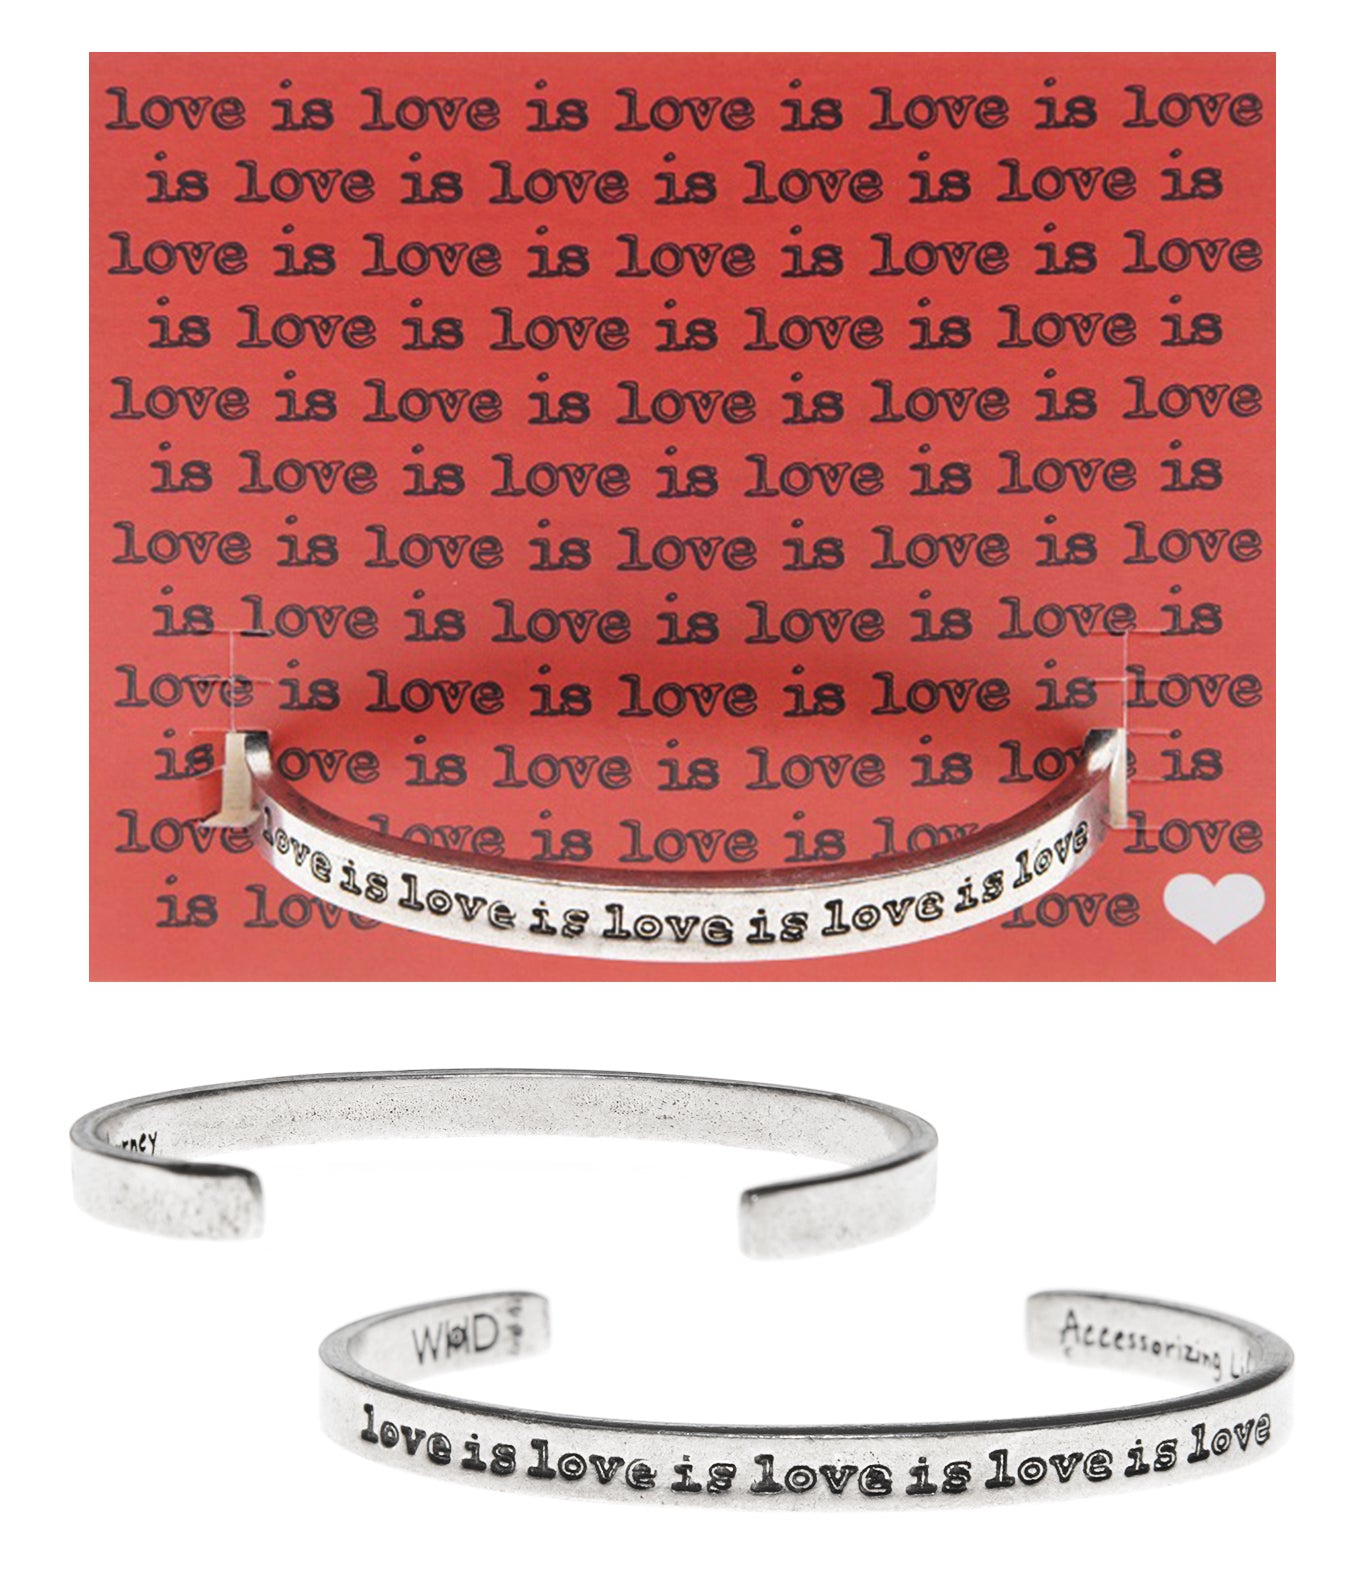 Love is love is love is Quotable Cuff Bracelet with backer card